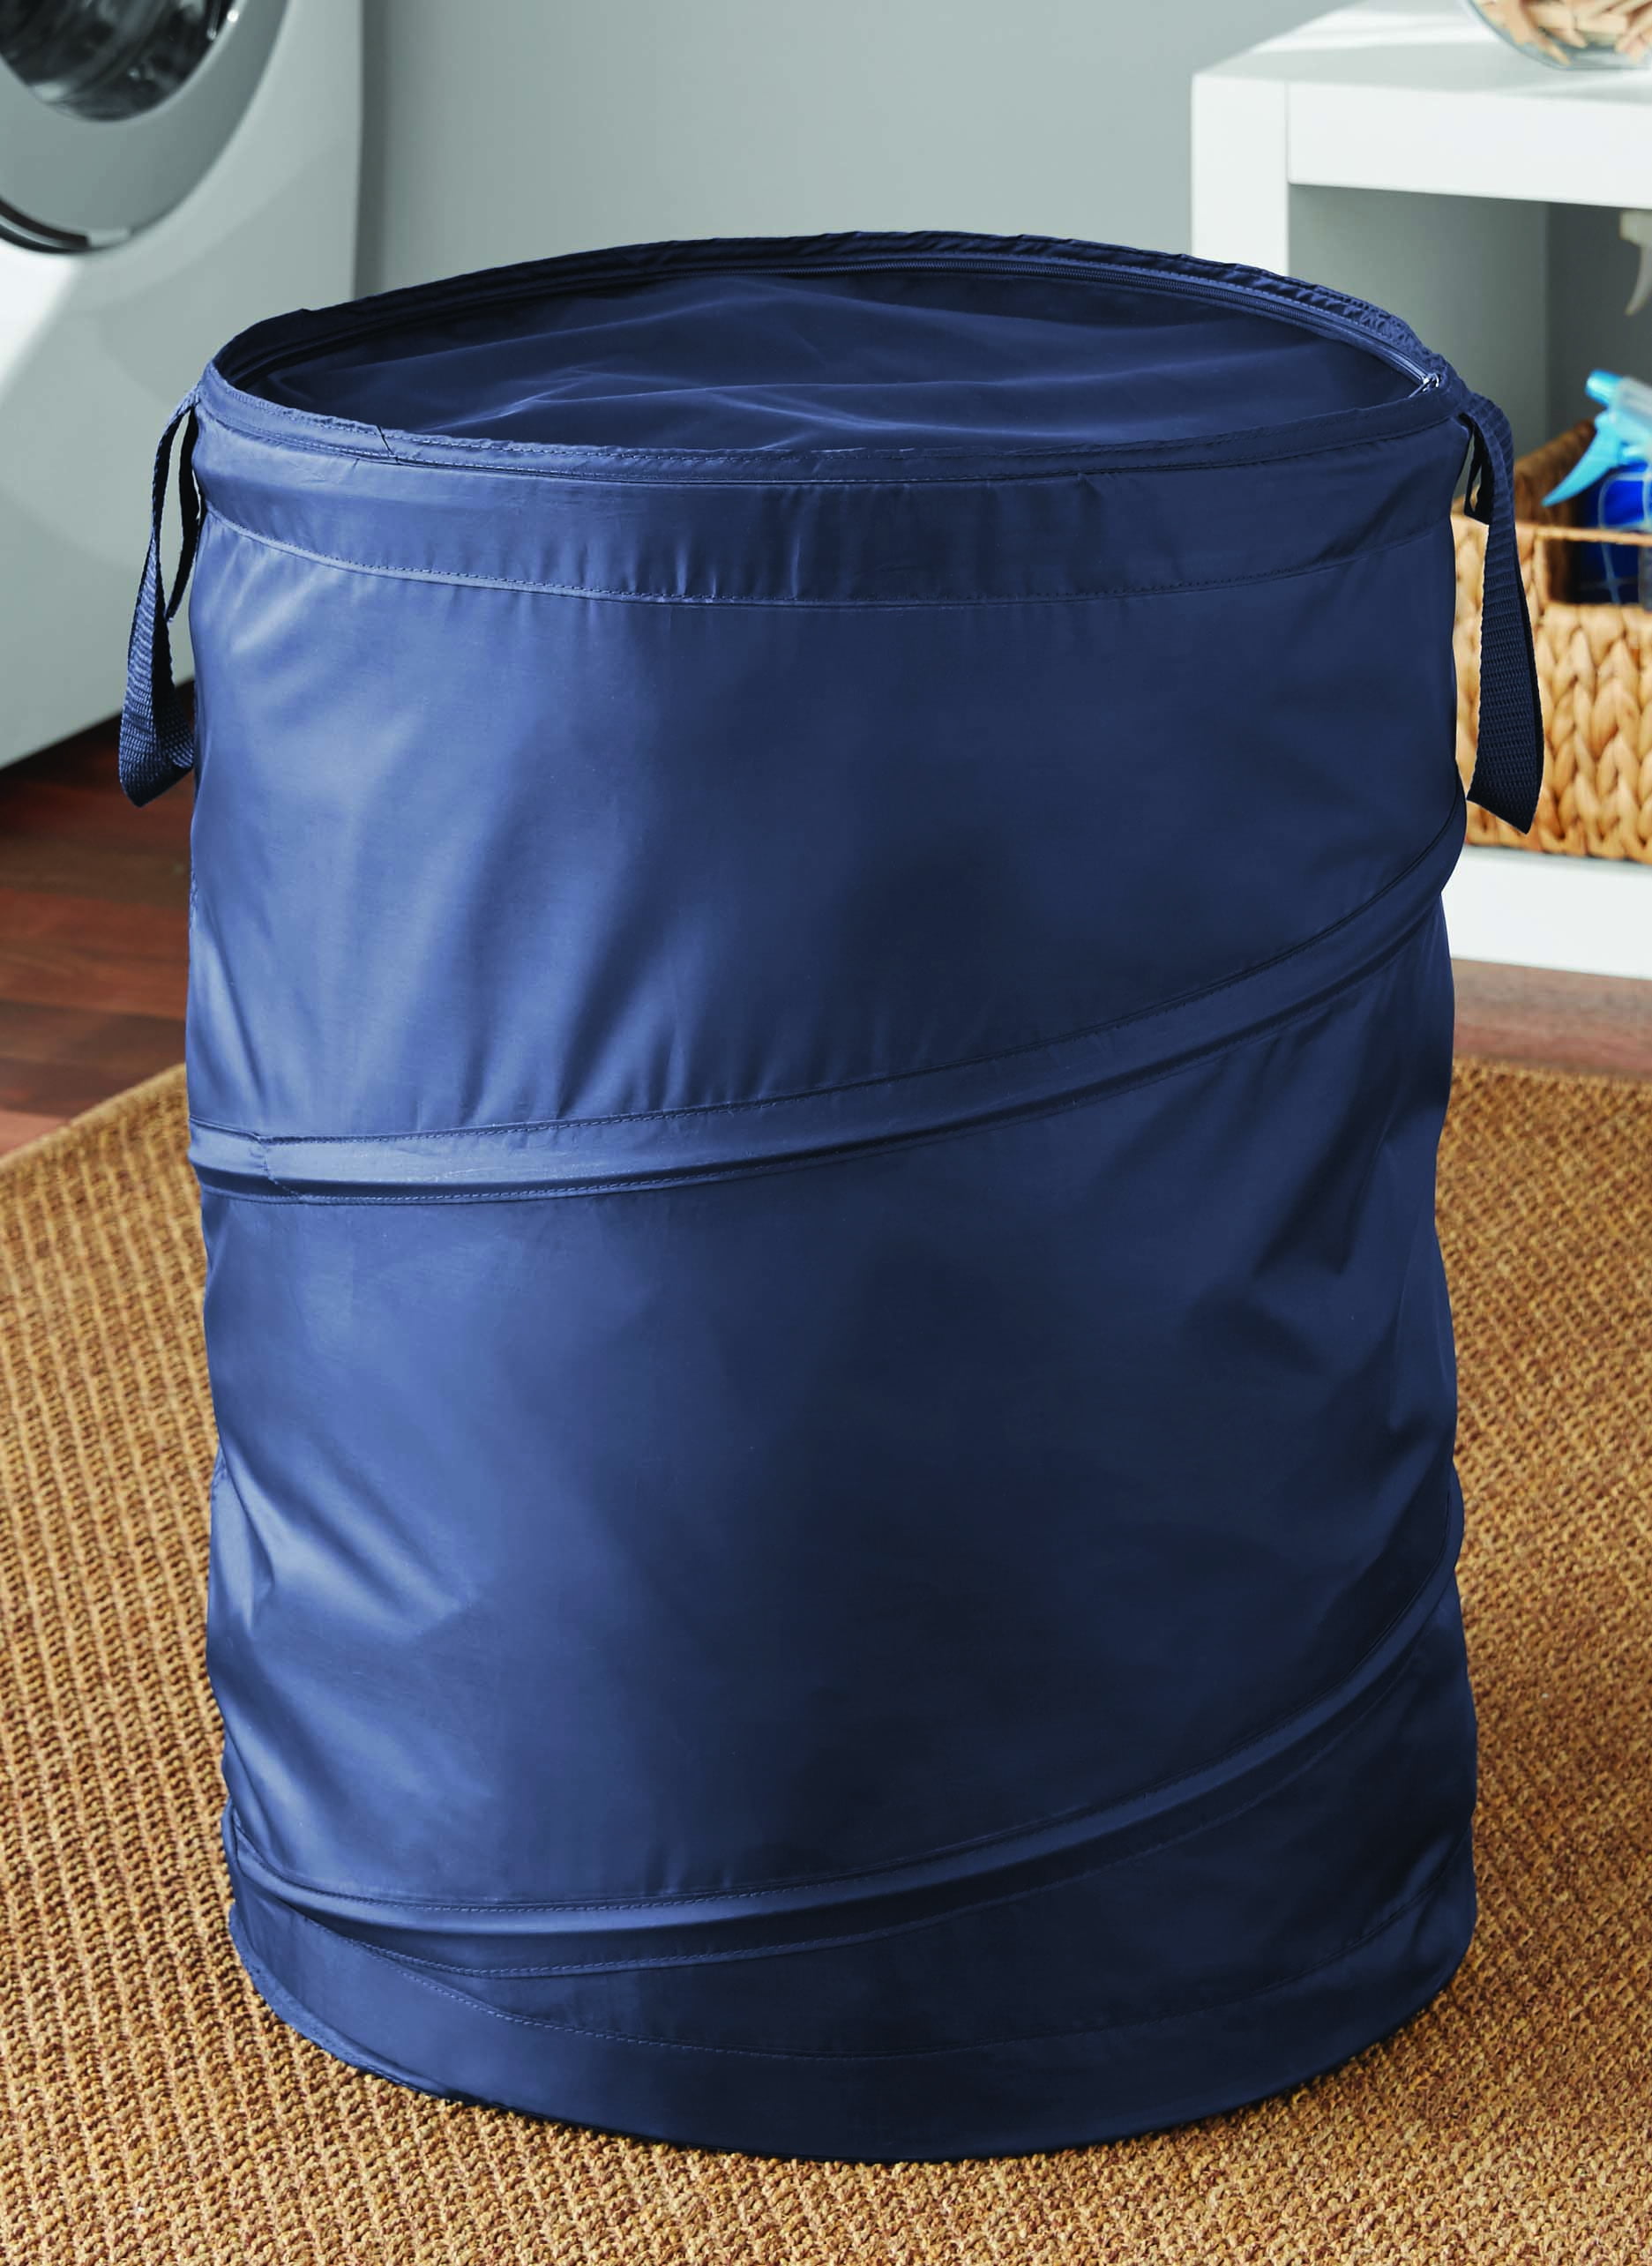 Mainstays Navy Polyester Spiral Pop-up Laundry Hamper with Zipper Lid